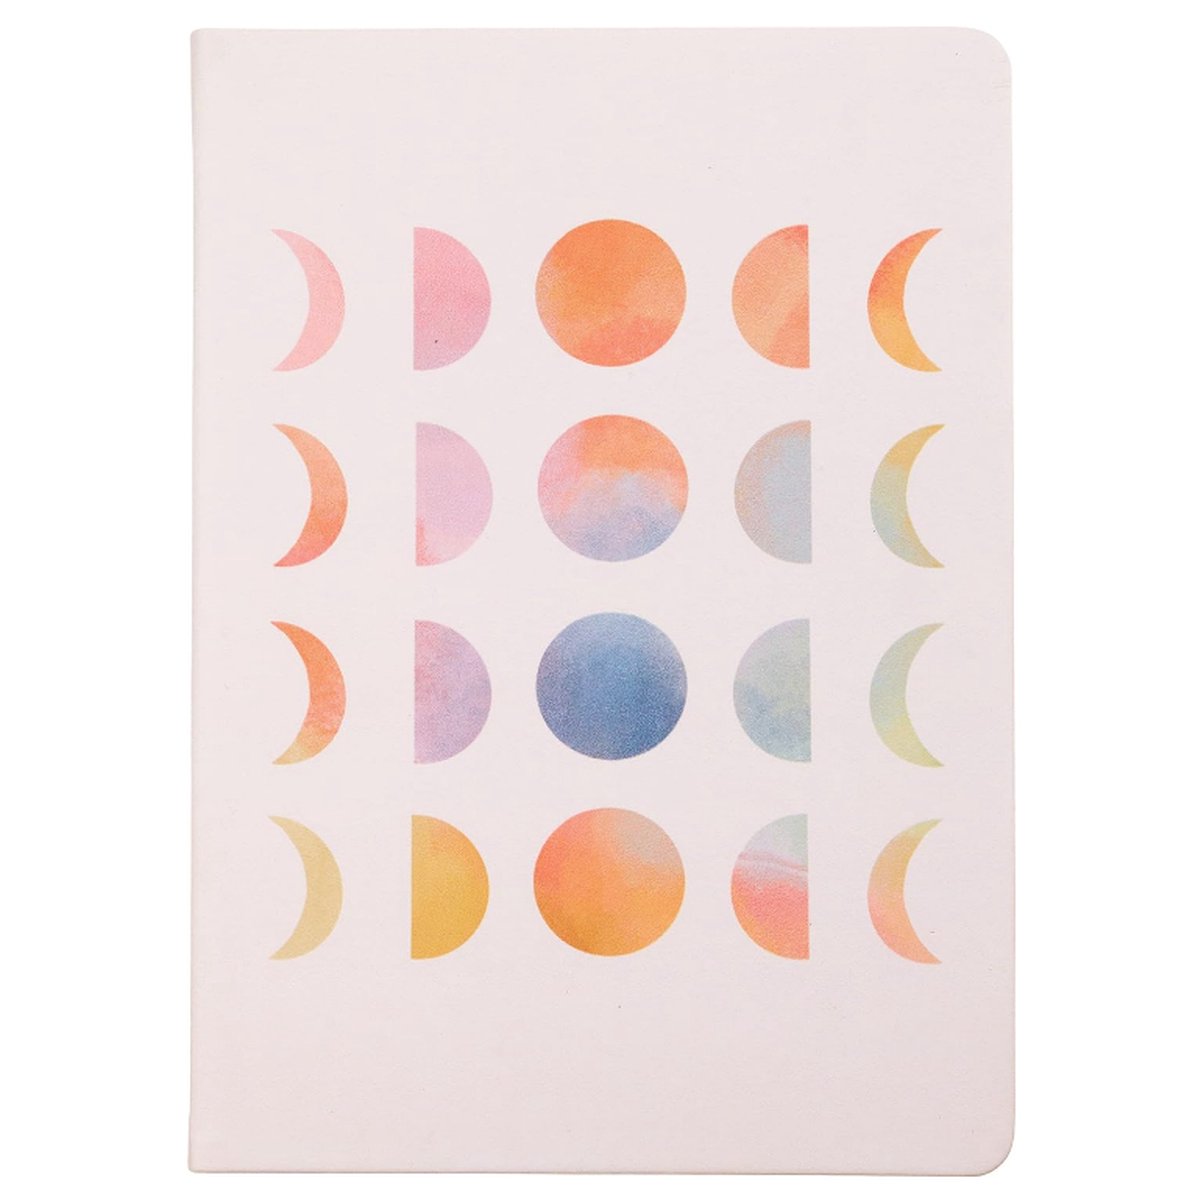 Eccolo Kenzi Sudio Medium Lined Journal Notebook, Flexible Cover, A5 Writing Journal, 192 Ruled Ivory Pages, Ribbon Bookmark, Lay Flat, Notebook for Work or School, Moon Phases (20.96 x 14.61 x 1.02 cm)